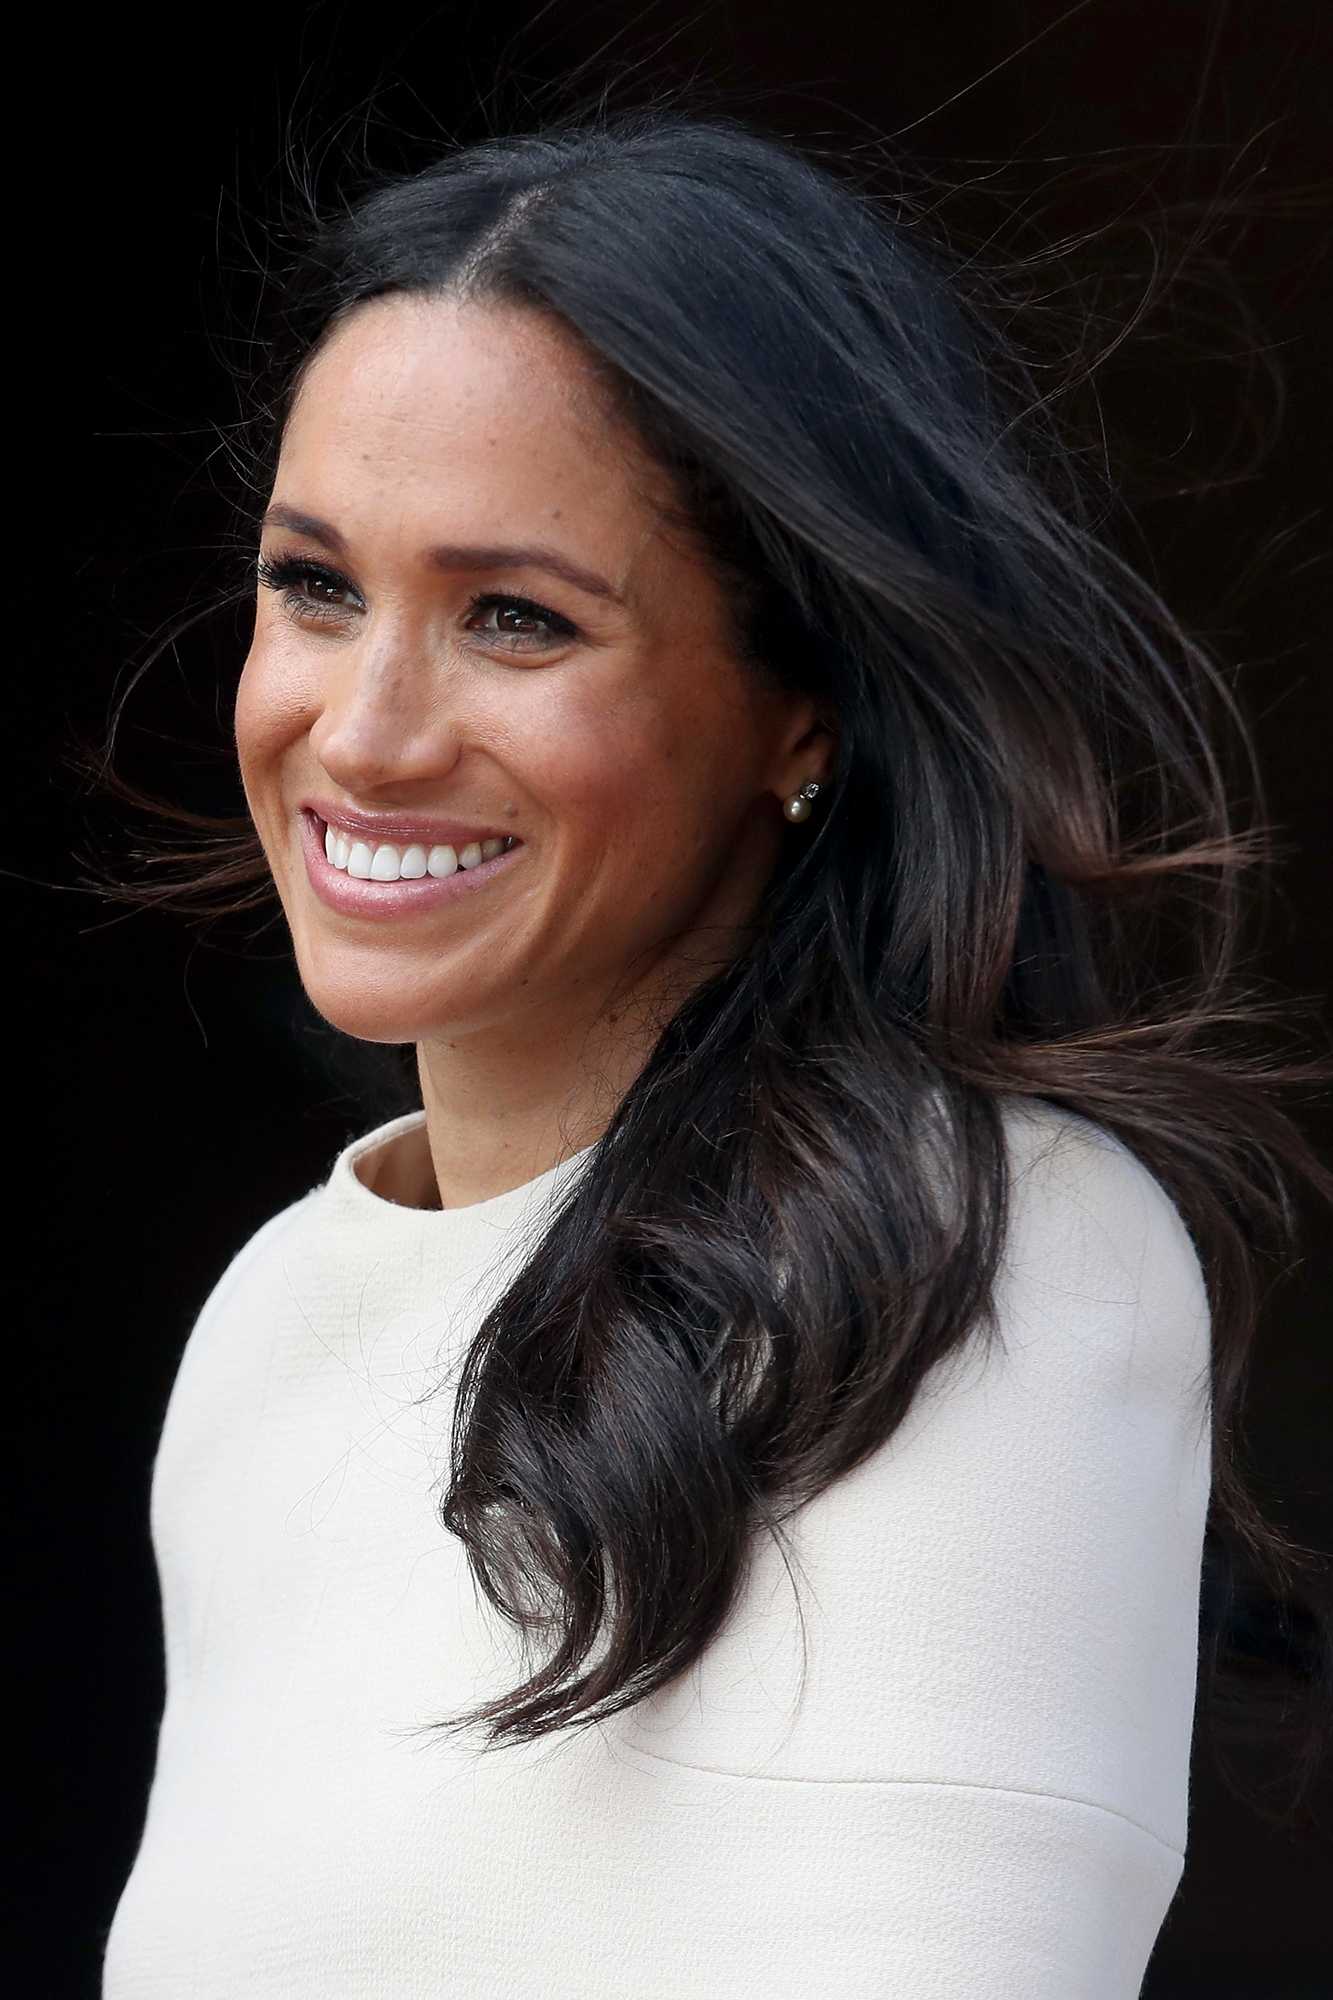 70+ Hot Pictures Of Meghan Markle Which Are Just Too Hot To Handle 228